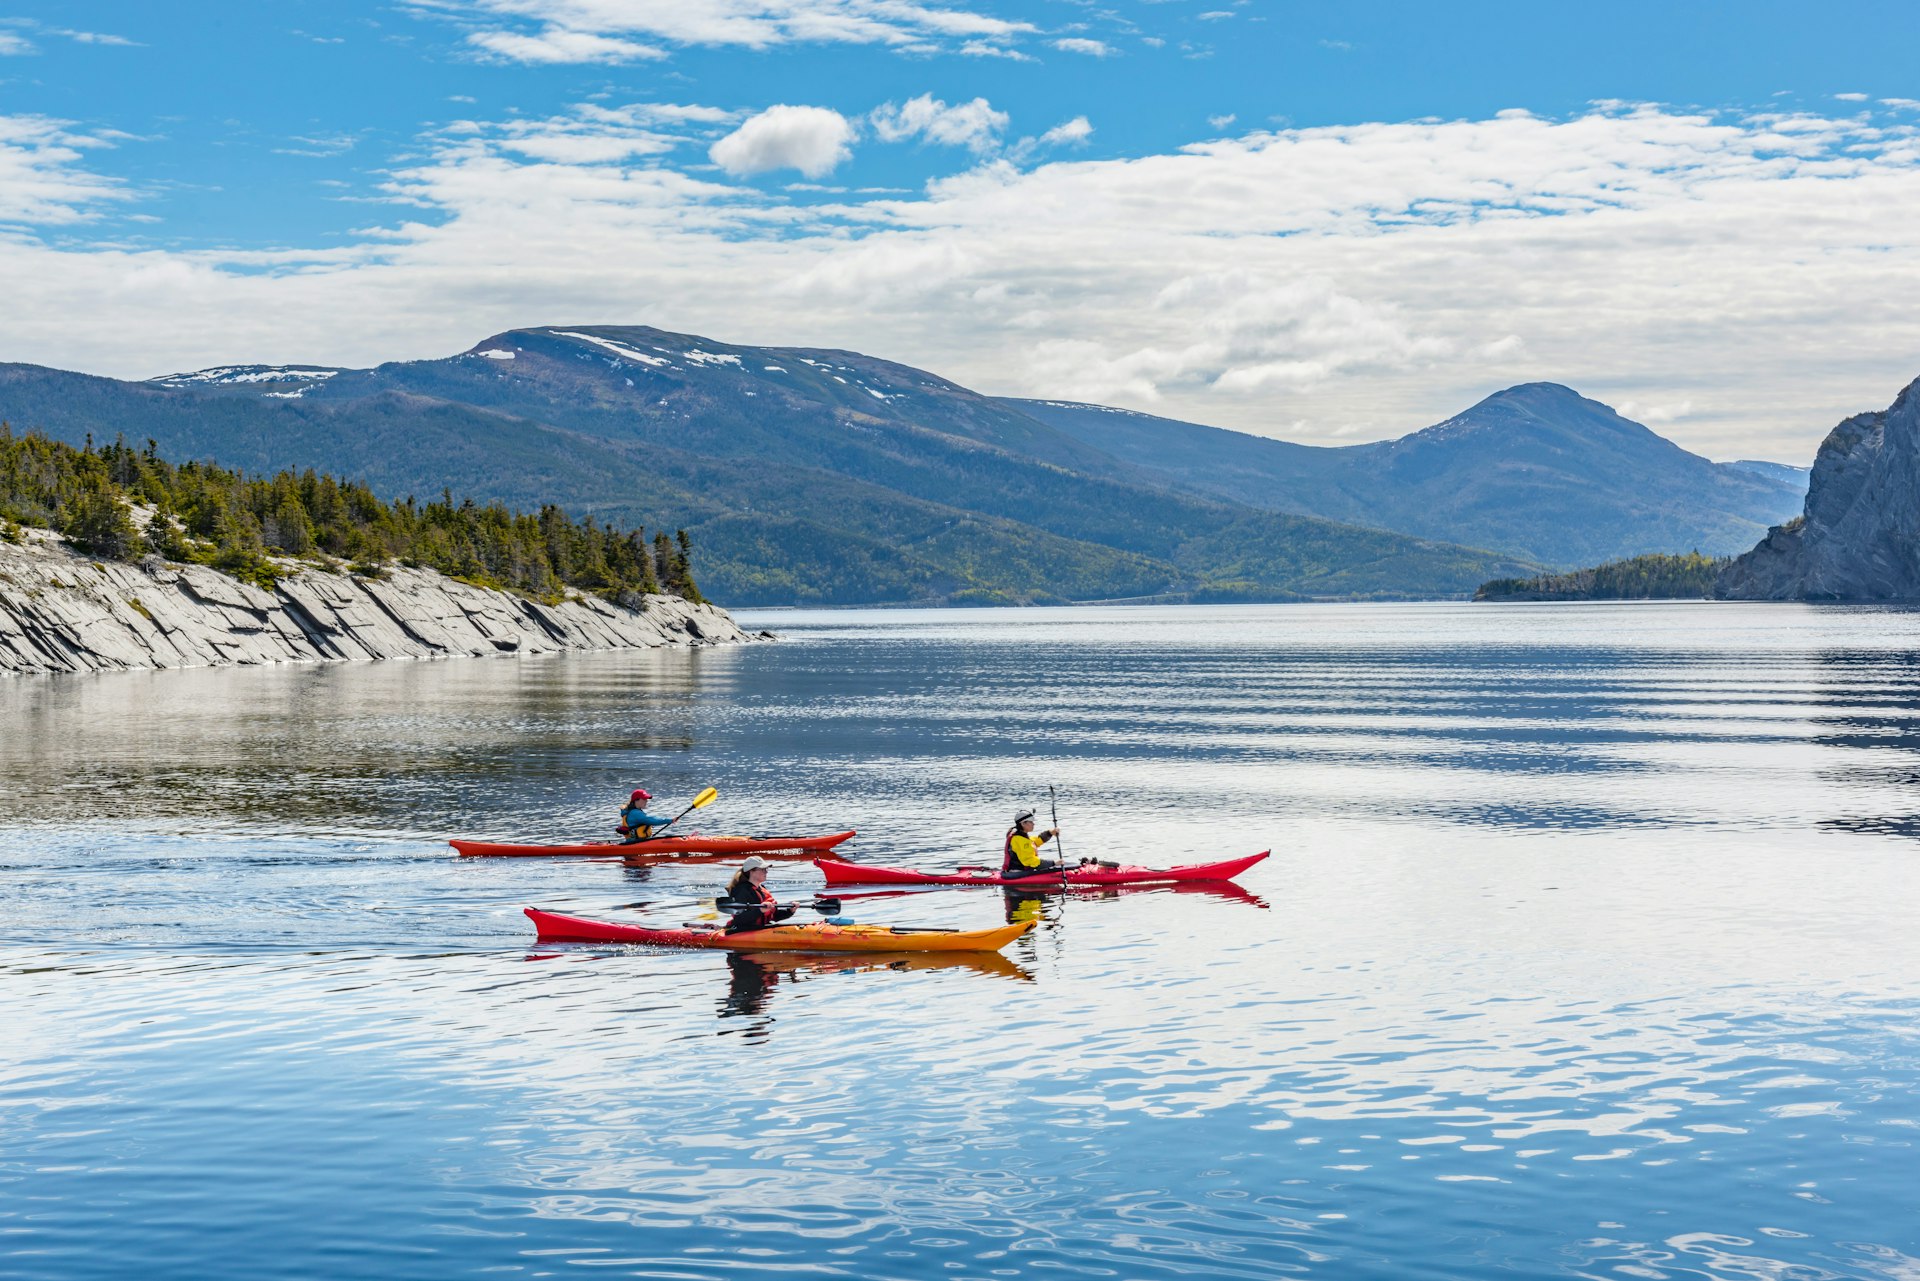  A kayaking group in Norris Cove at Norris Point, Gros Morne National Park, Newfoundland, Canada